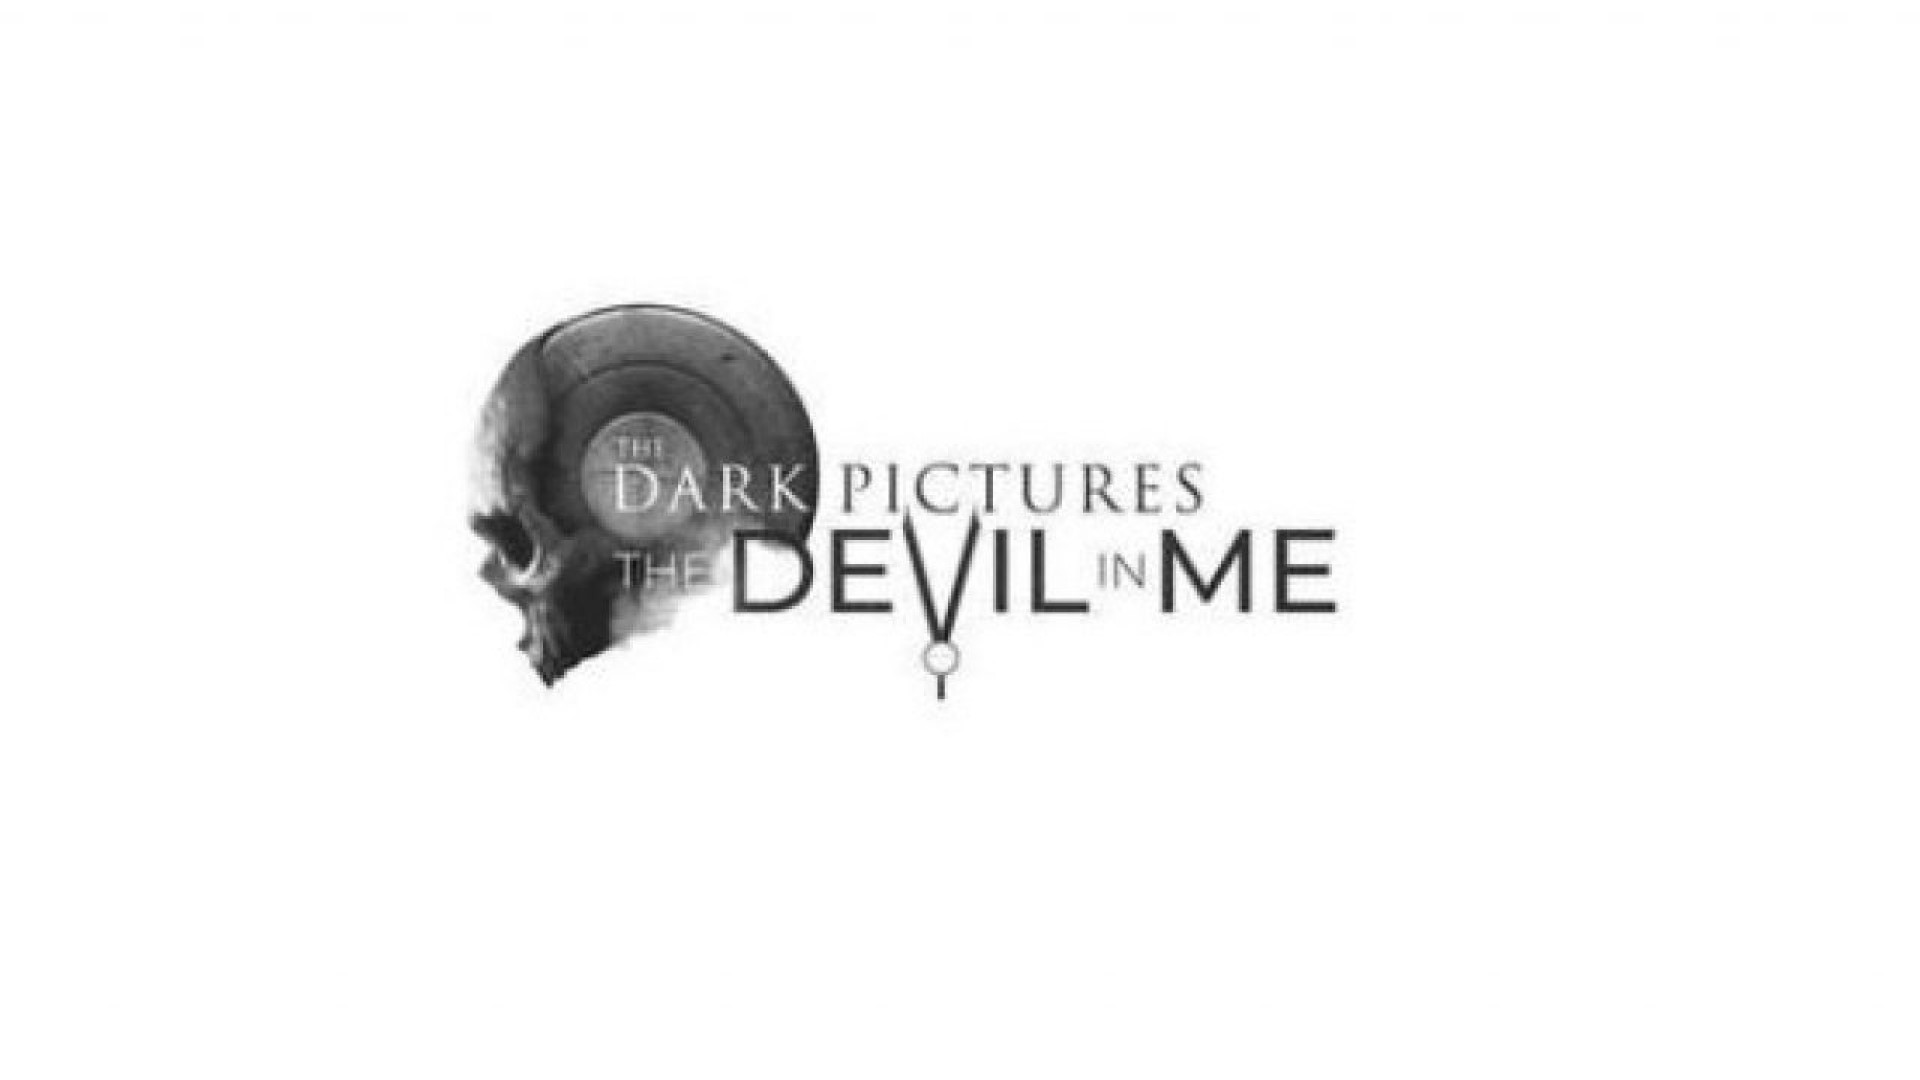 The Dark Picture Anthology's Next Game is Called The Devil in Me, According to a Trademark